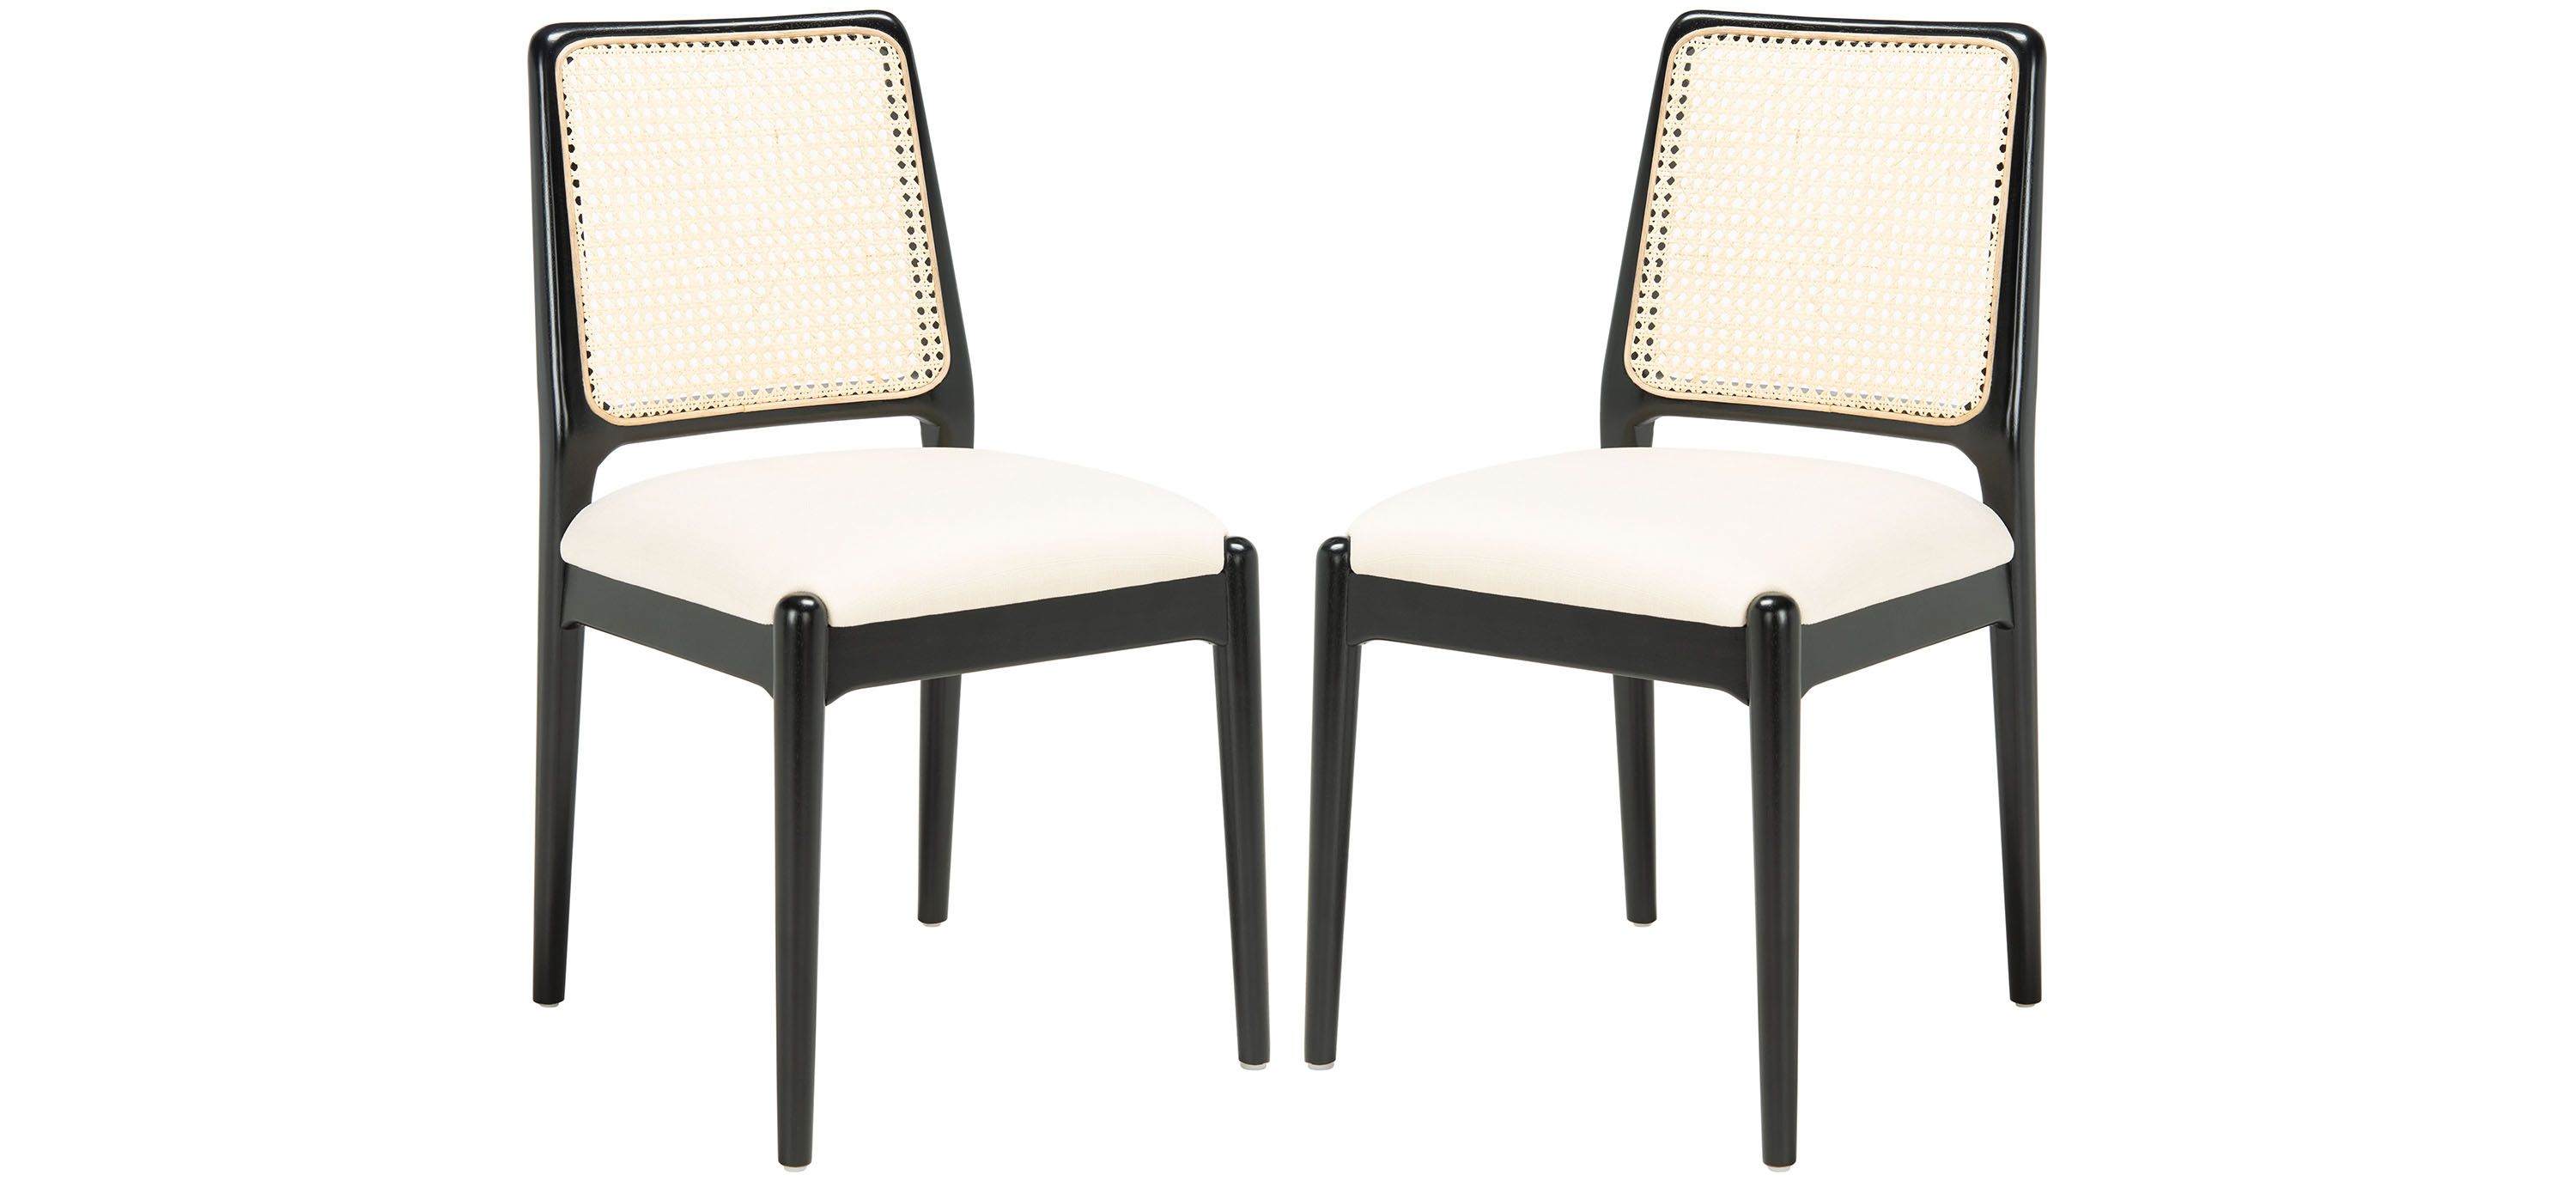 Brisor Dining Chair - Set of 2